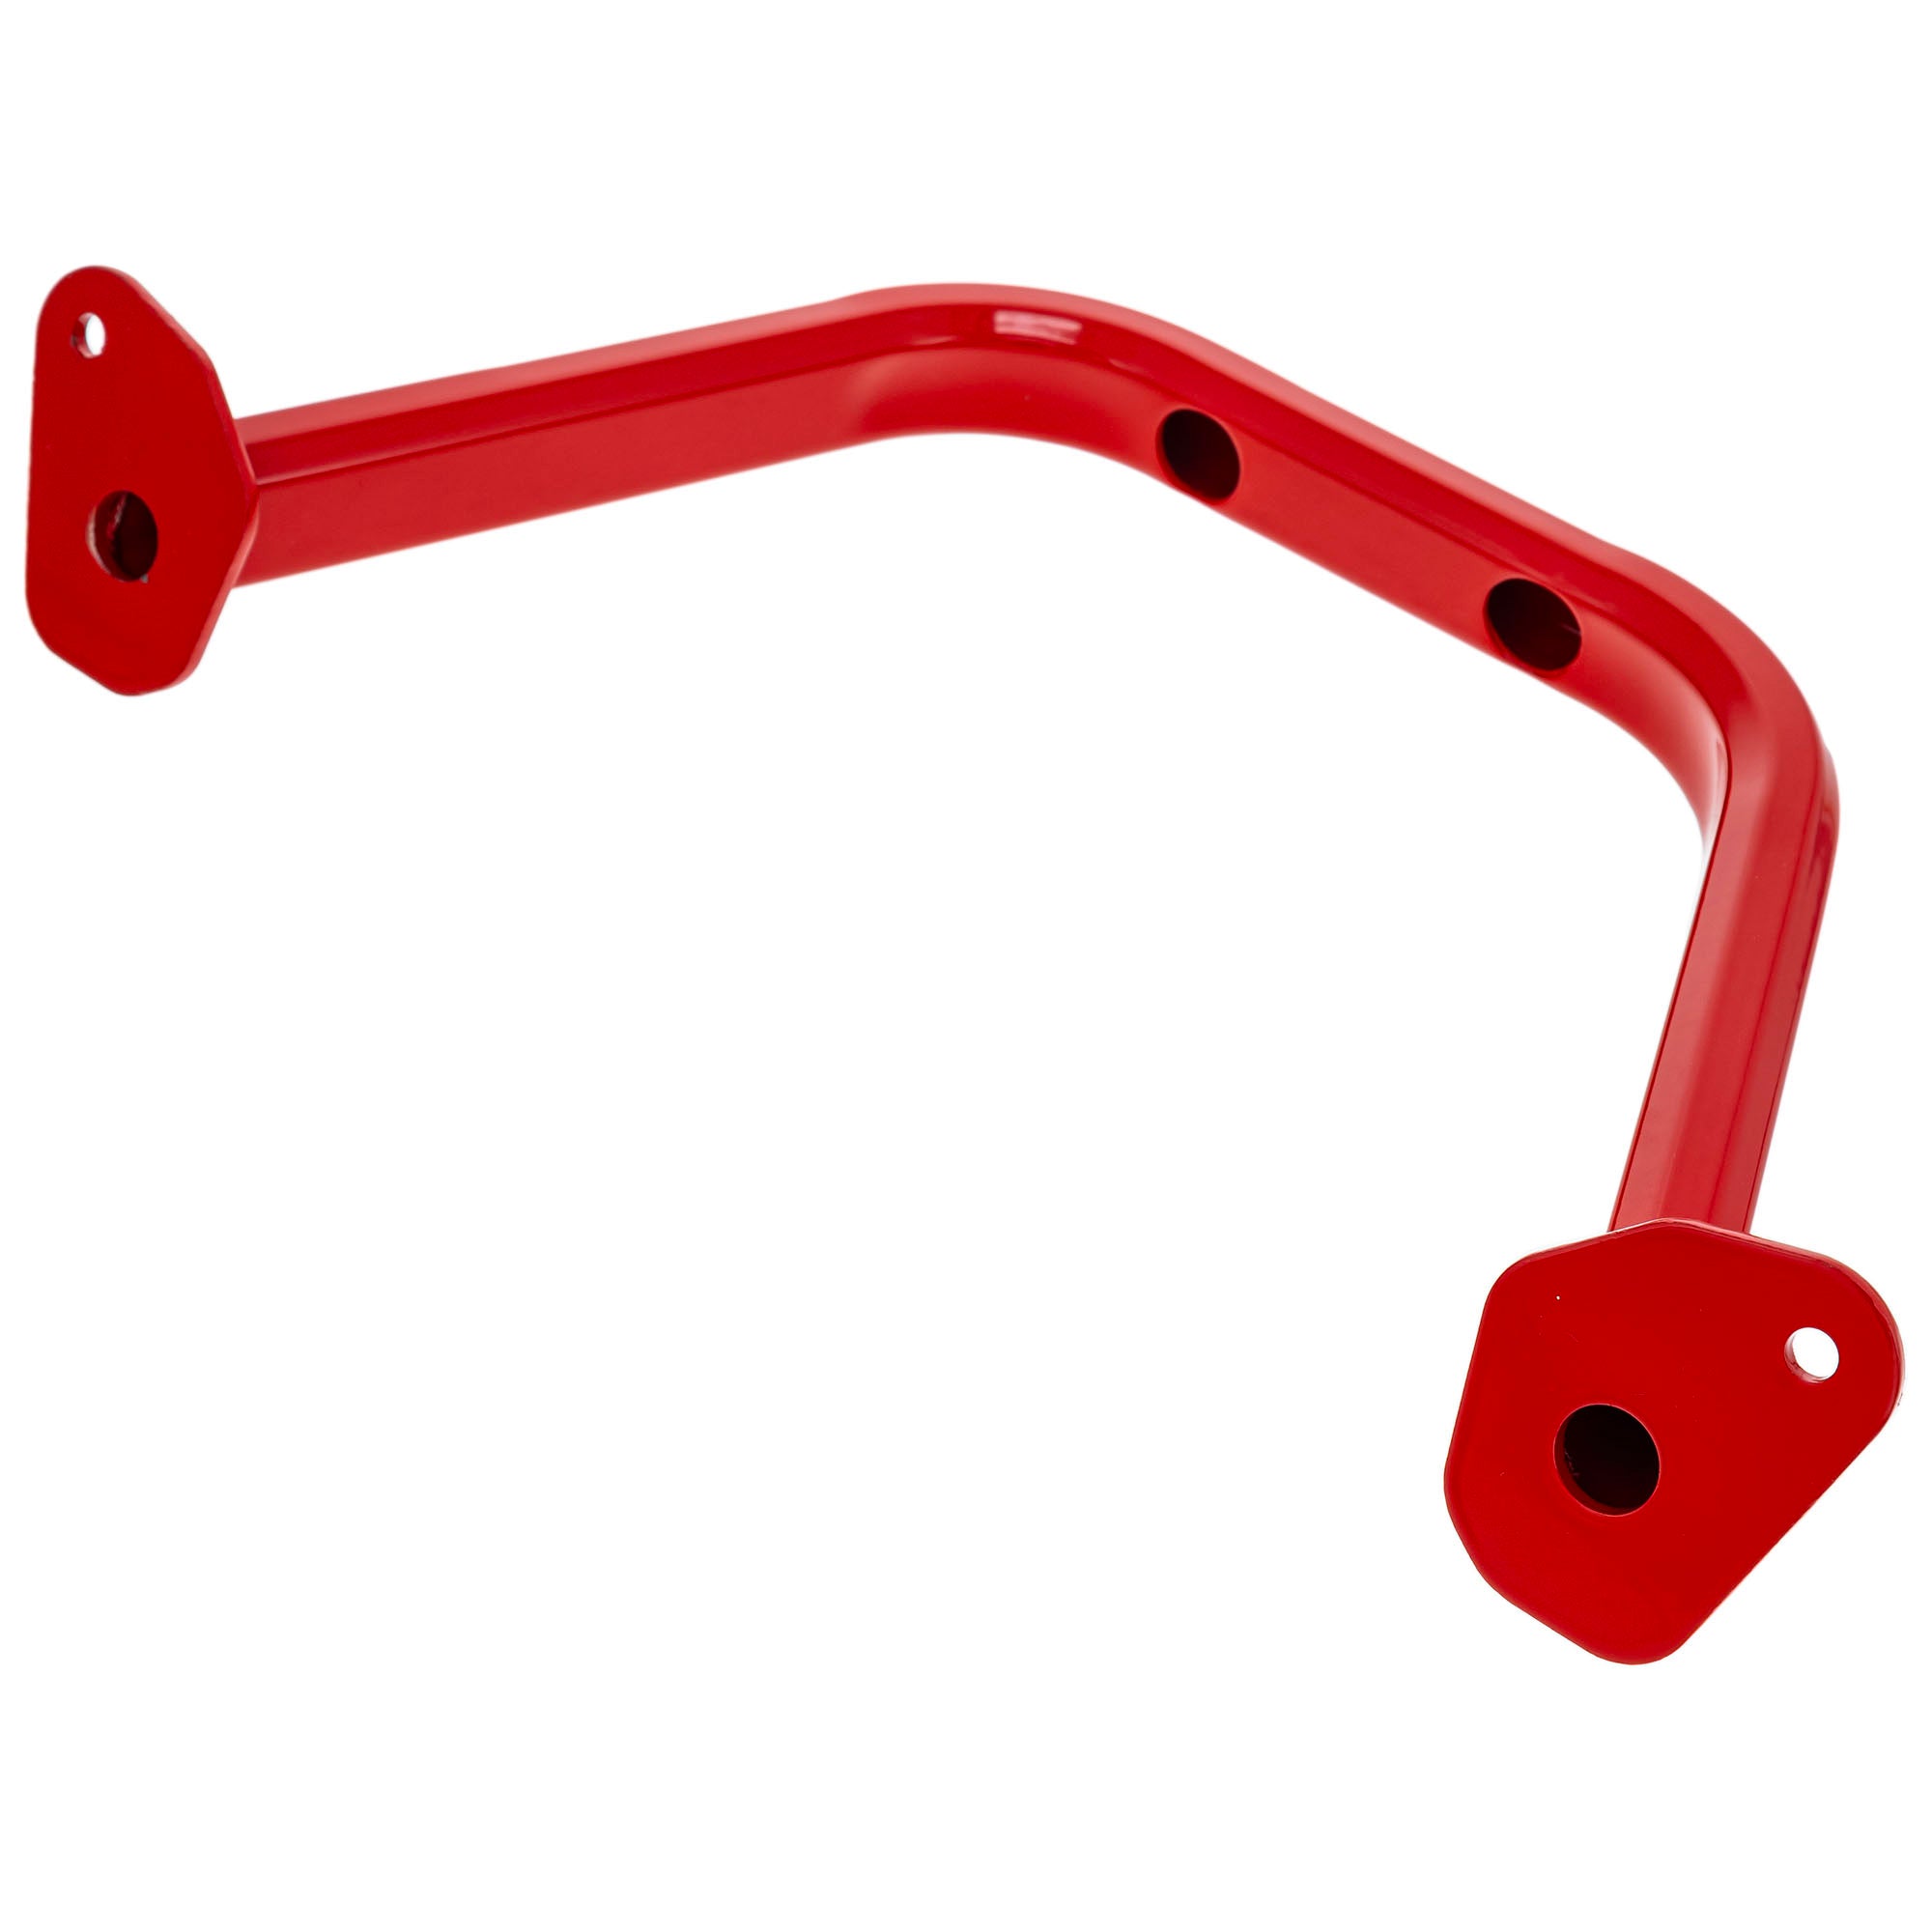 Polaris Indy Red Seat Support 1018789-293